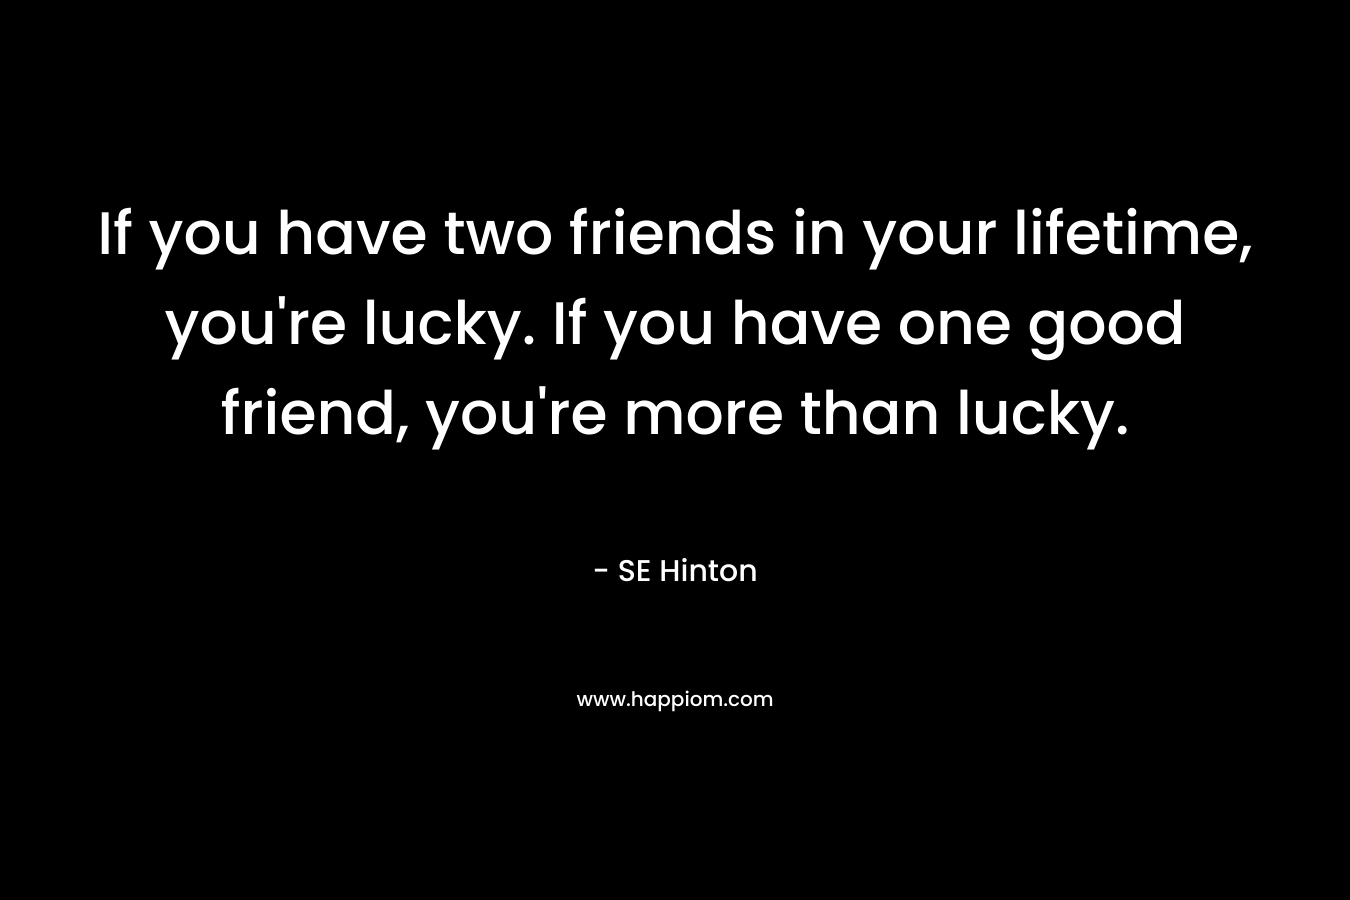 If you have two friends in your lifetime, you're lucky. If you have one good friend, you're more than lucky.